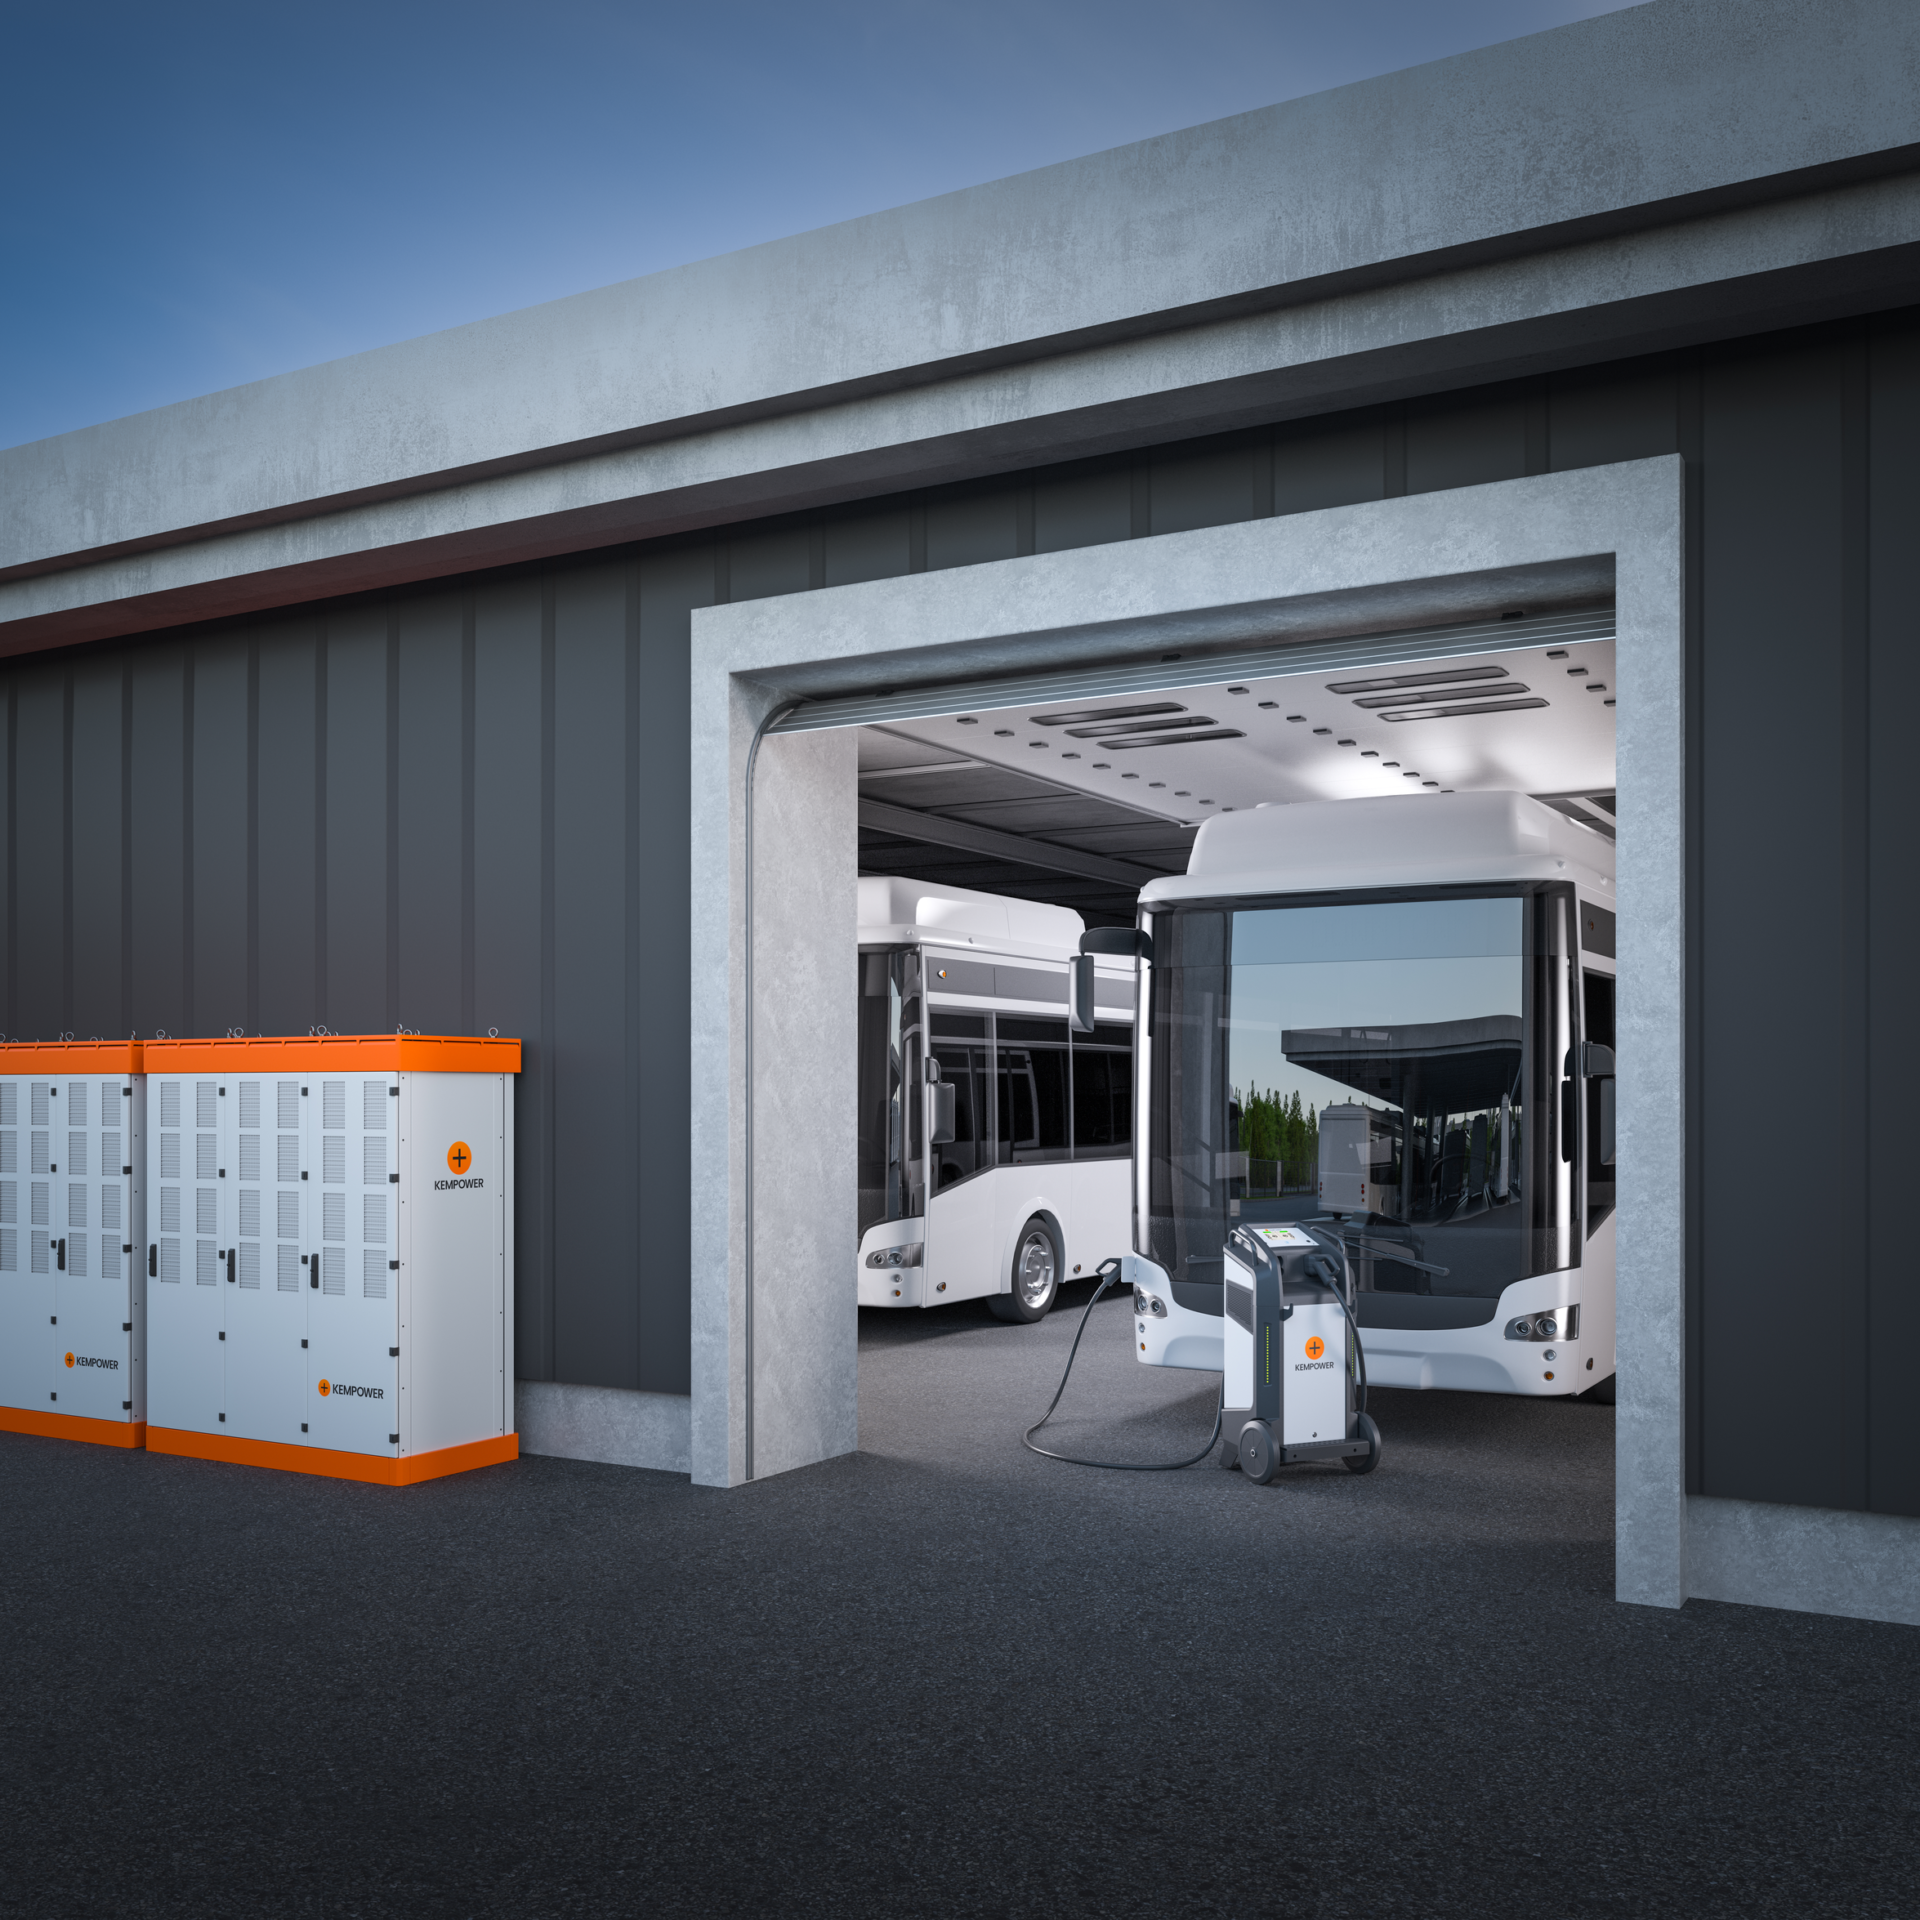 Electric buses parked at charging station in garage